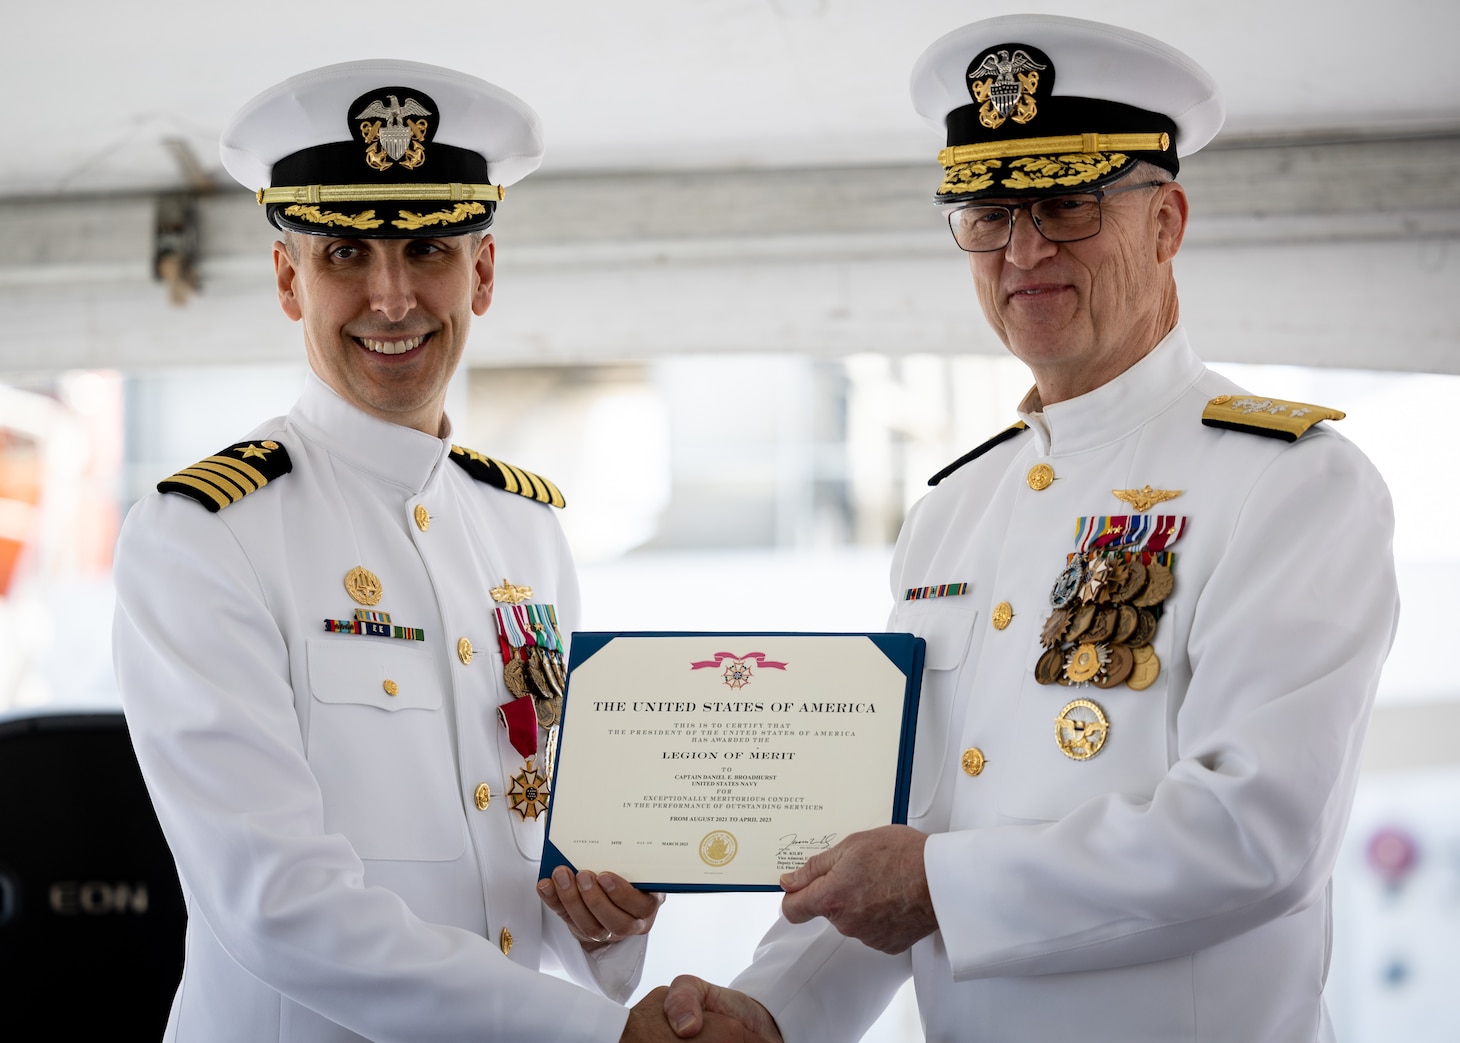 Military Sealift Command’s leadership in the Atlantic changed hands, when Navy Capt. James A. Murdock relieved Navy Capt. Daniel E. Broadhurst as commander of Norfolk-based Military Sealift Command Atlantic (MSC Atlantic) during a change of command ceremony held aboard Navy hospital ship USNS Comfort (T-AH-20) in Naval Station Norfolk April 13, 2023. In this picture, Broadhurst (left) receives Legion of Merit award from Rear Adm. Michael A. Wettlaufer (right), commander of MSC.